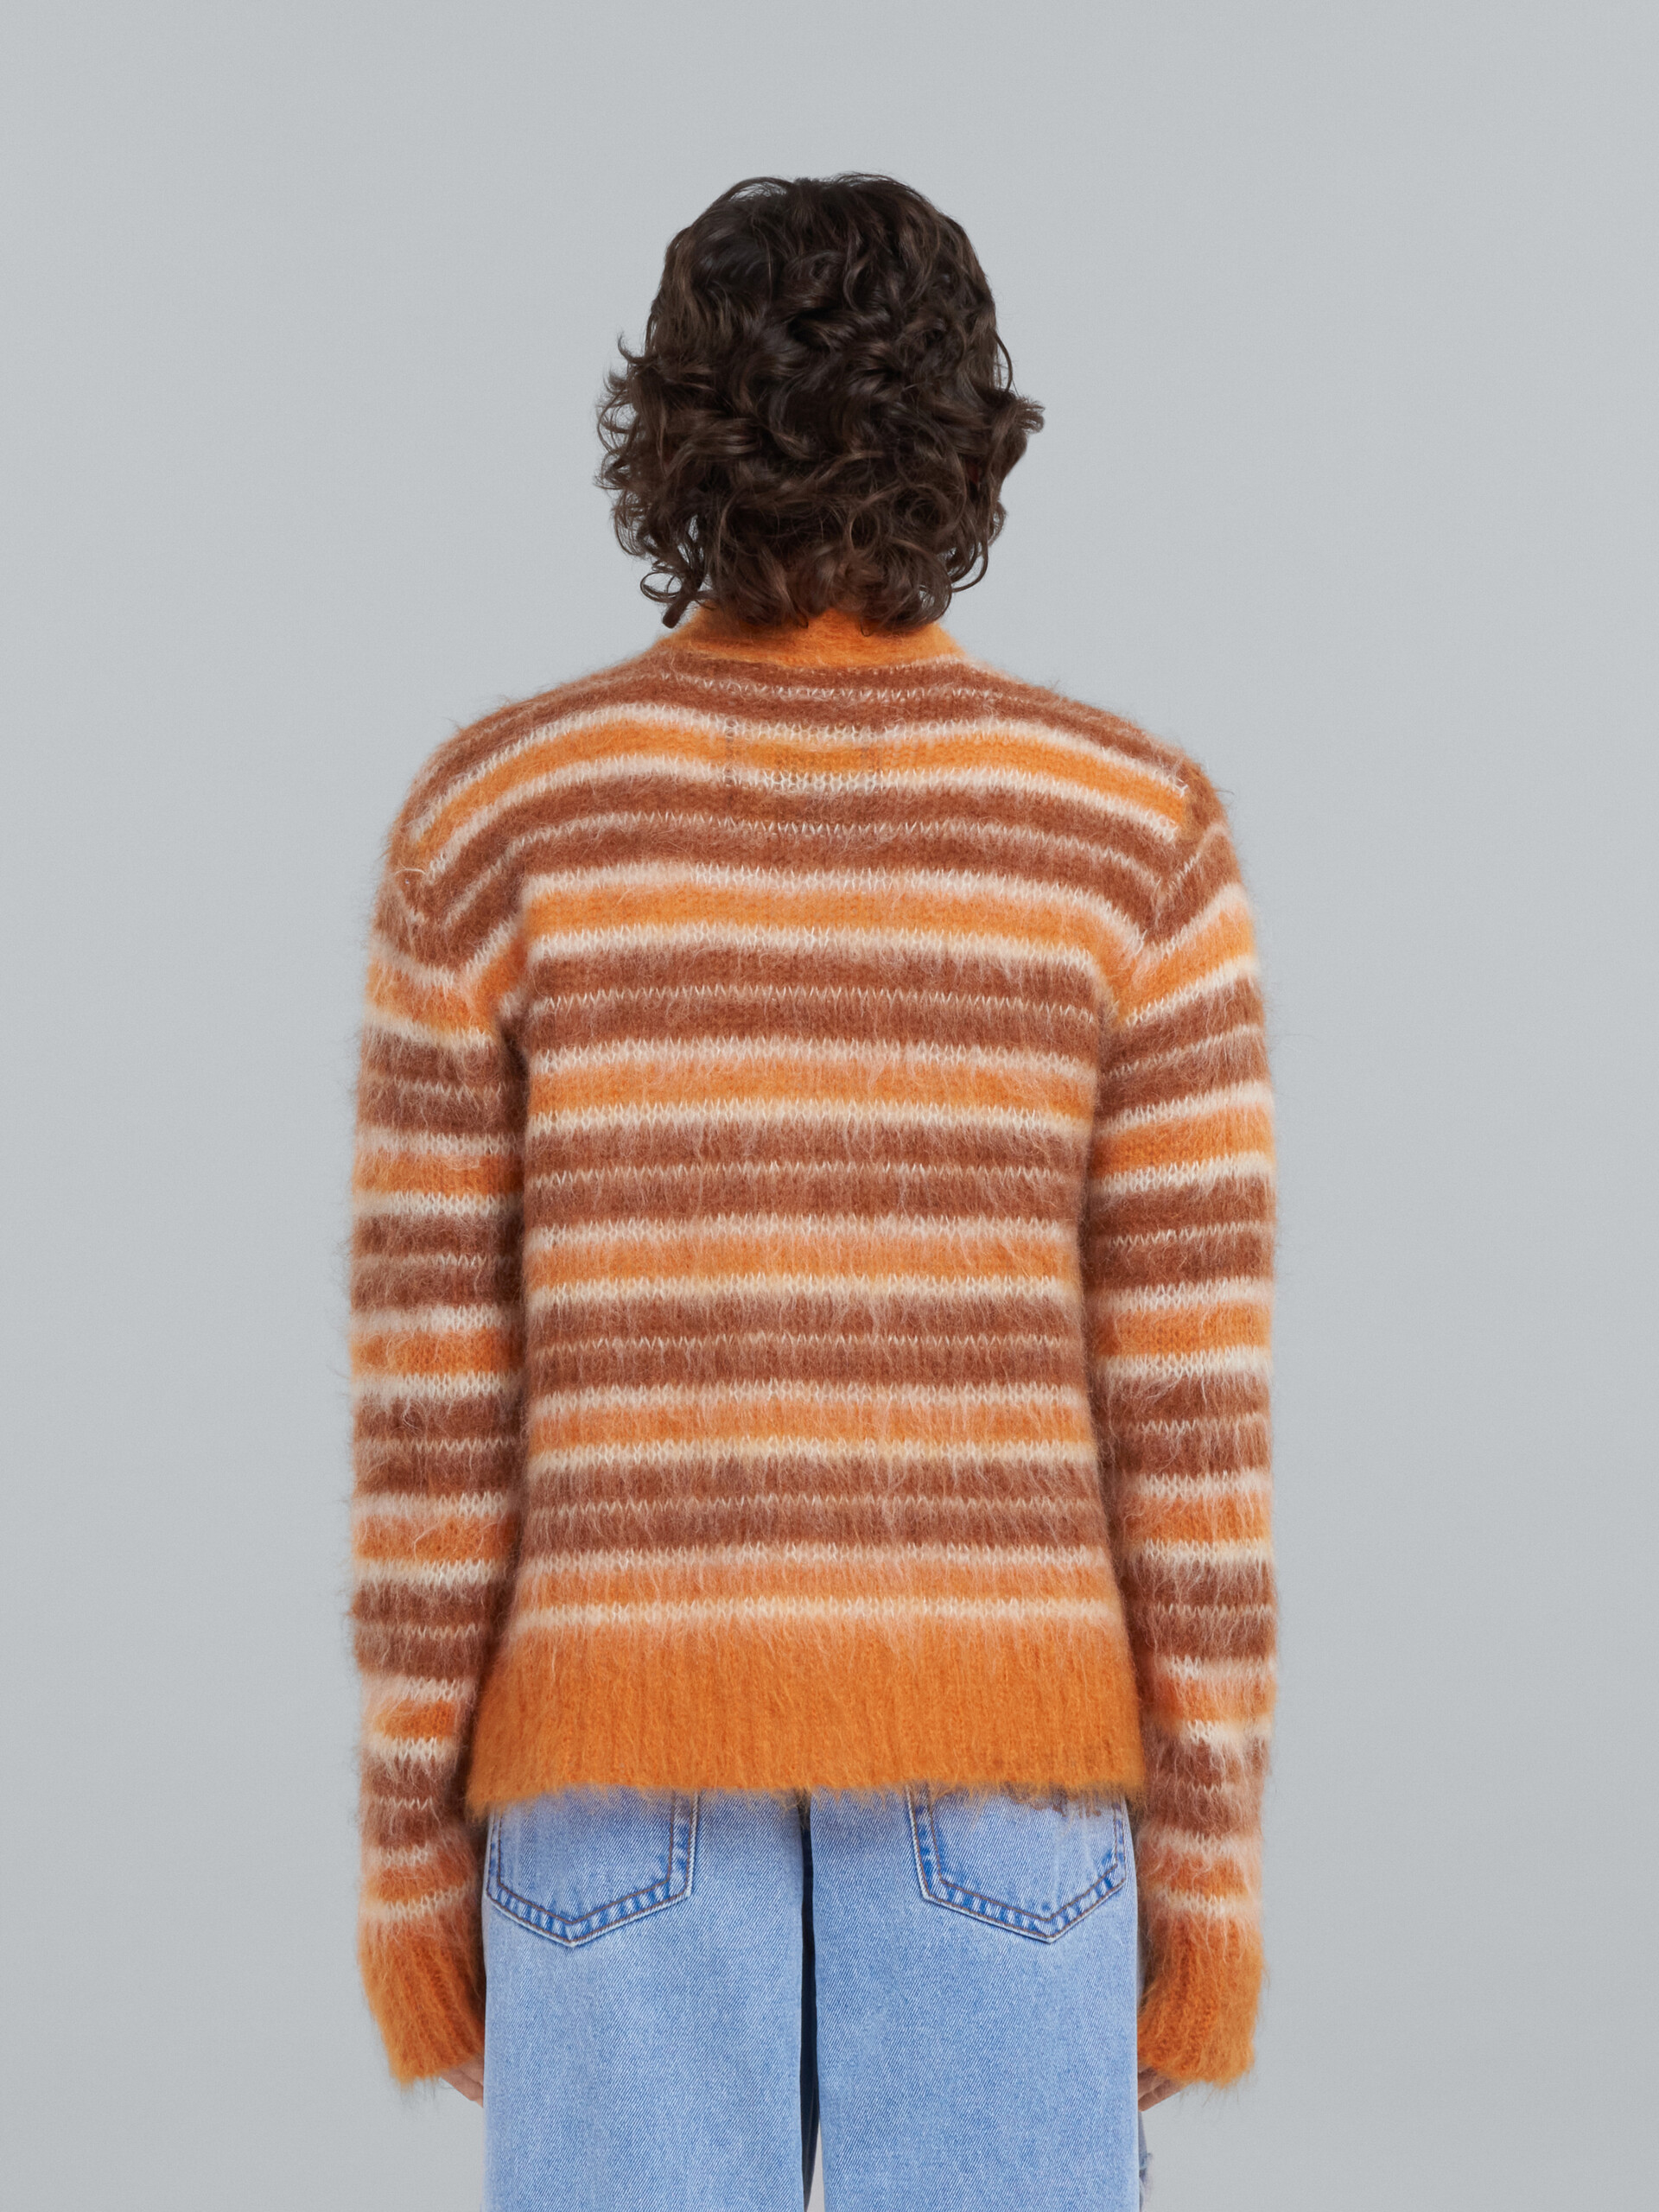 Mohair cardigan with orange stripes - Pullovers - Image 3